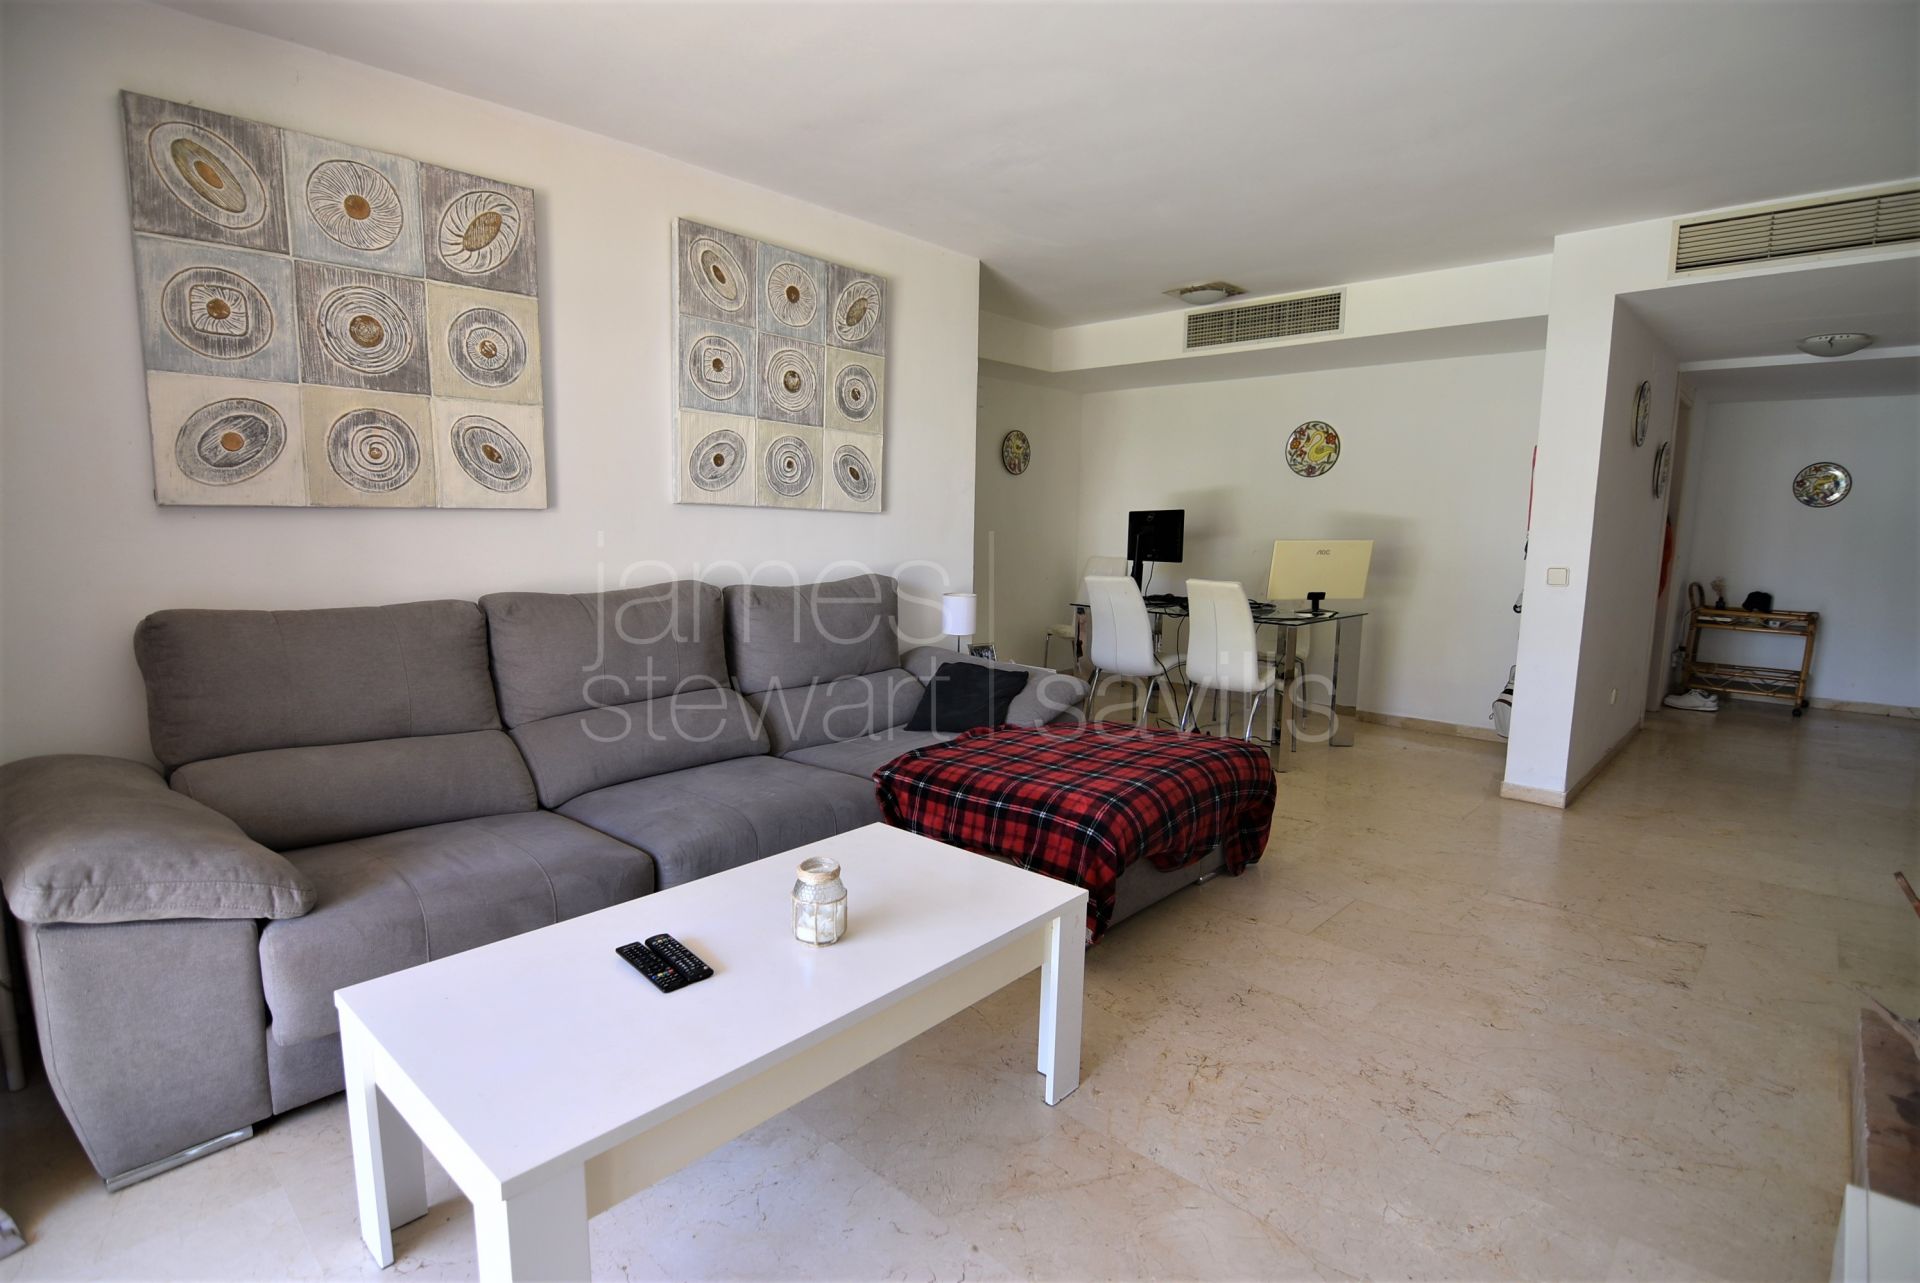 Excellent one bedroom beachfront apartment with garden only 30 metres from the beach